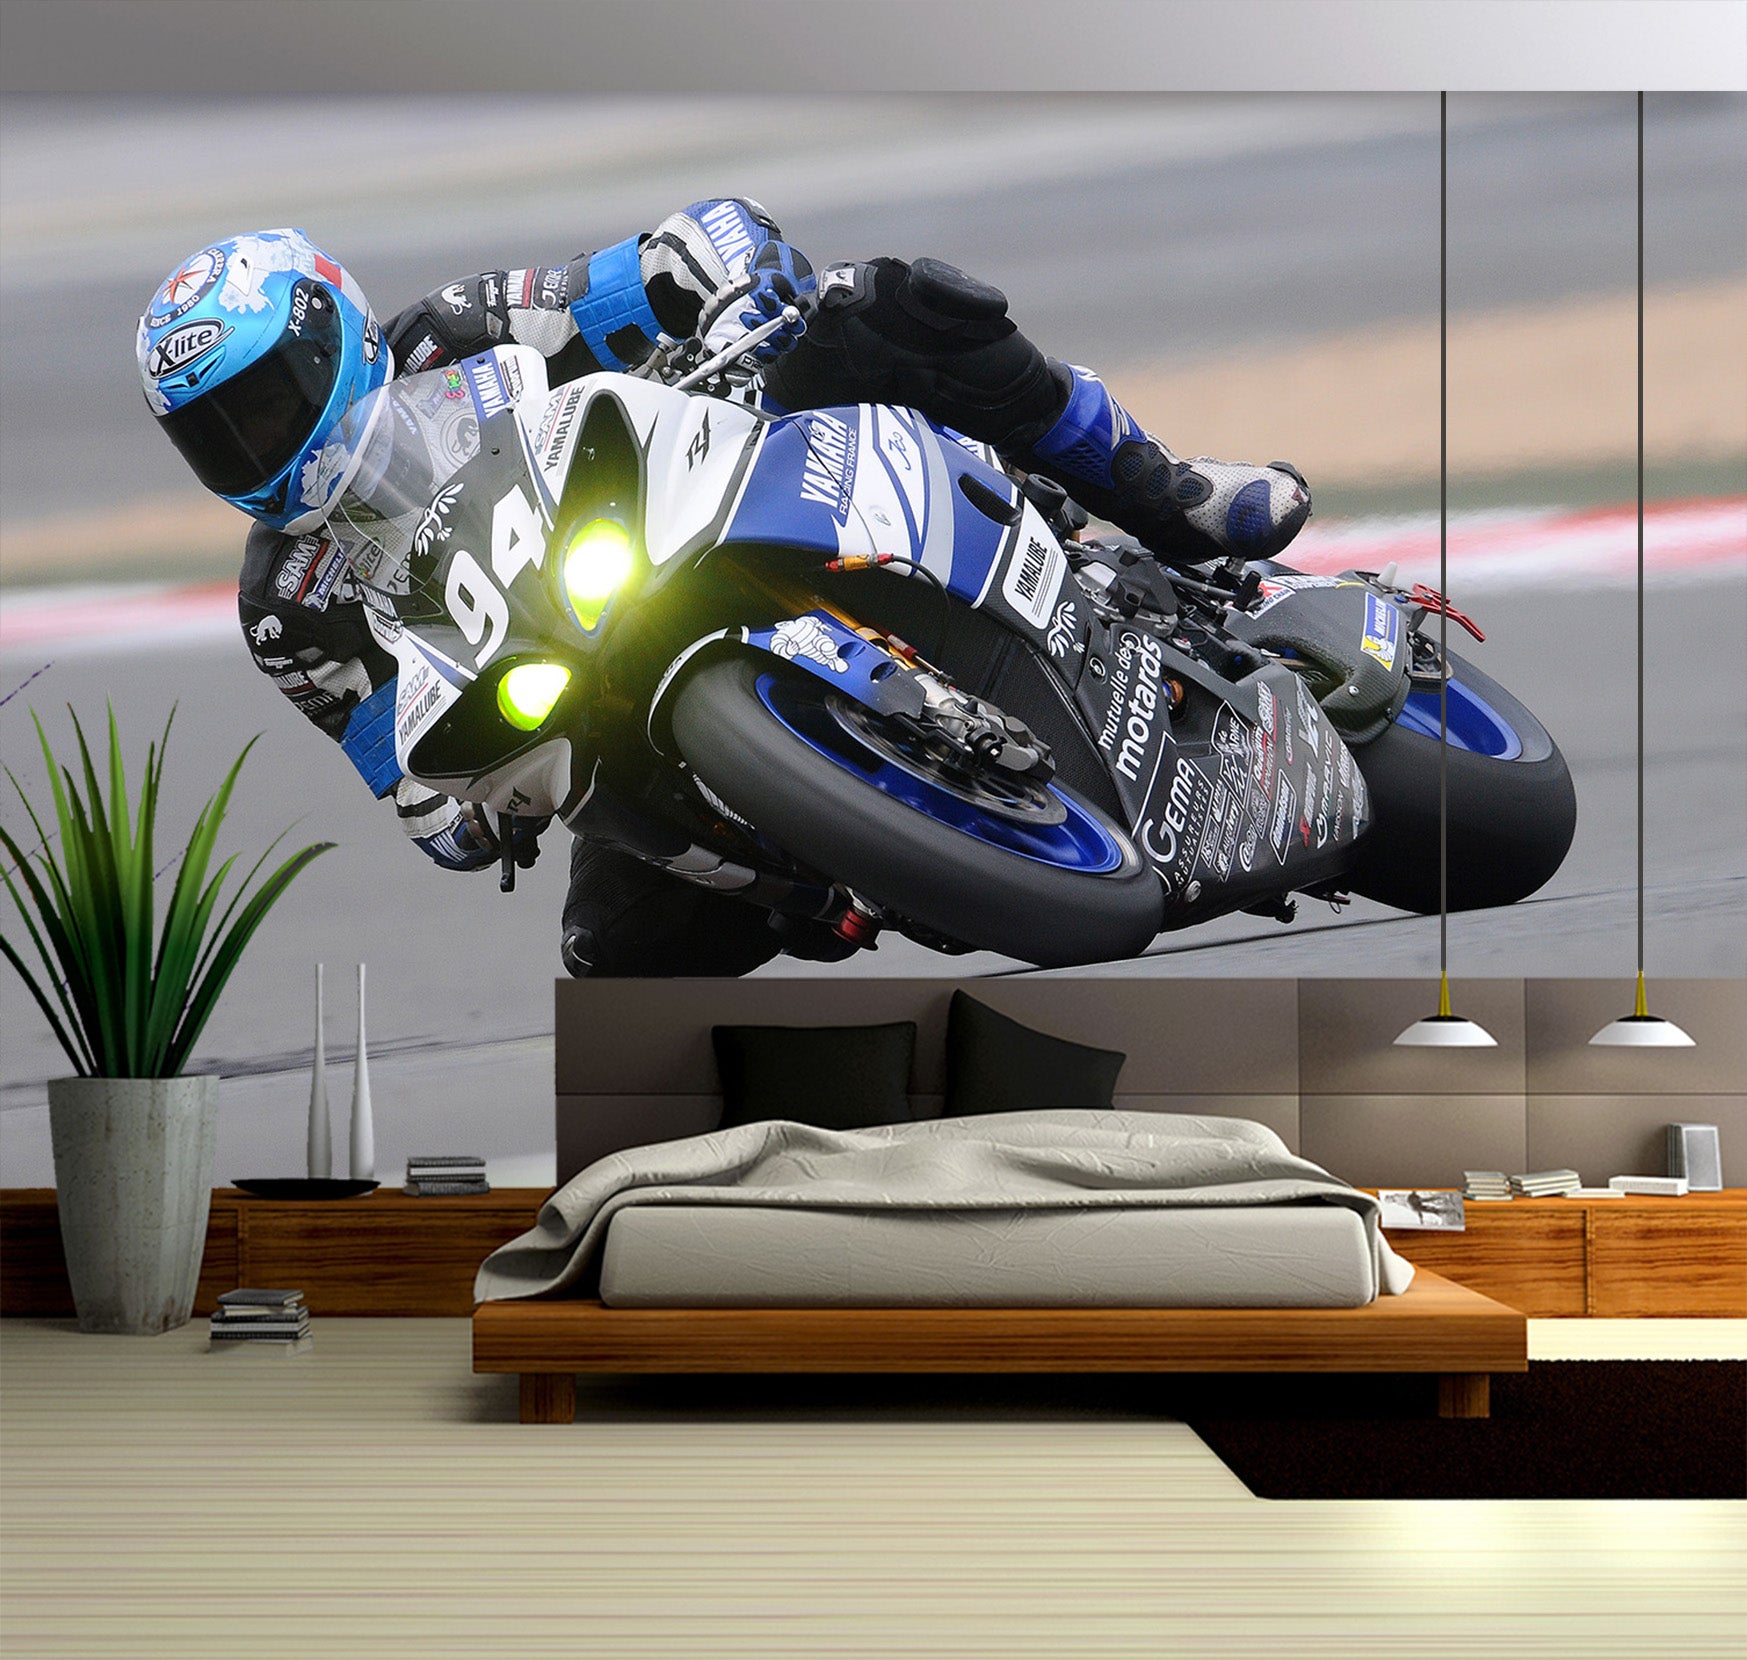 3D Motorcycle Driving 052 Vehicle Wall Murals